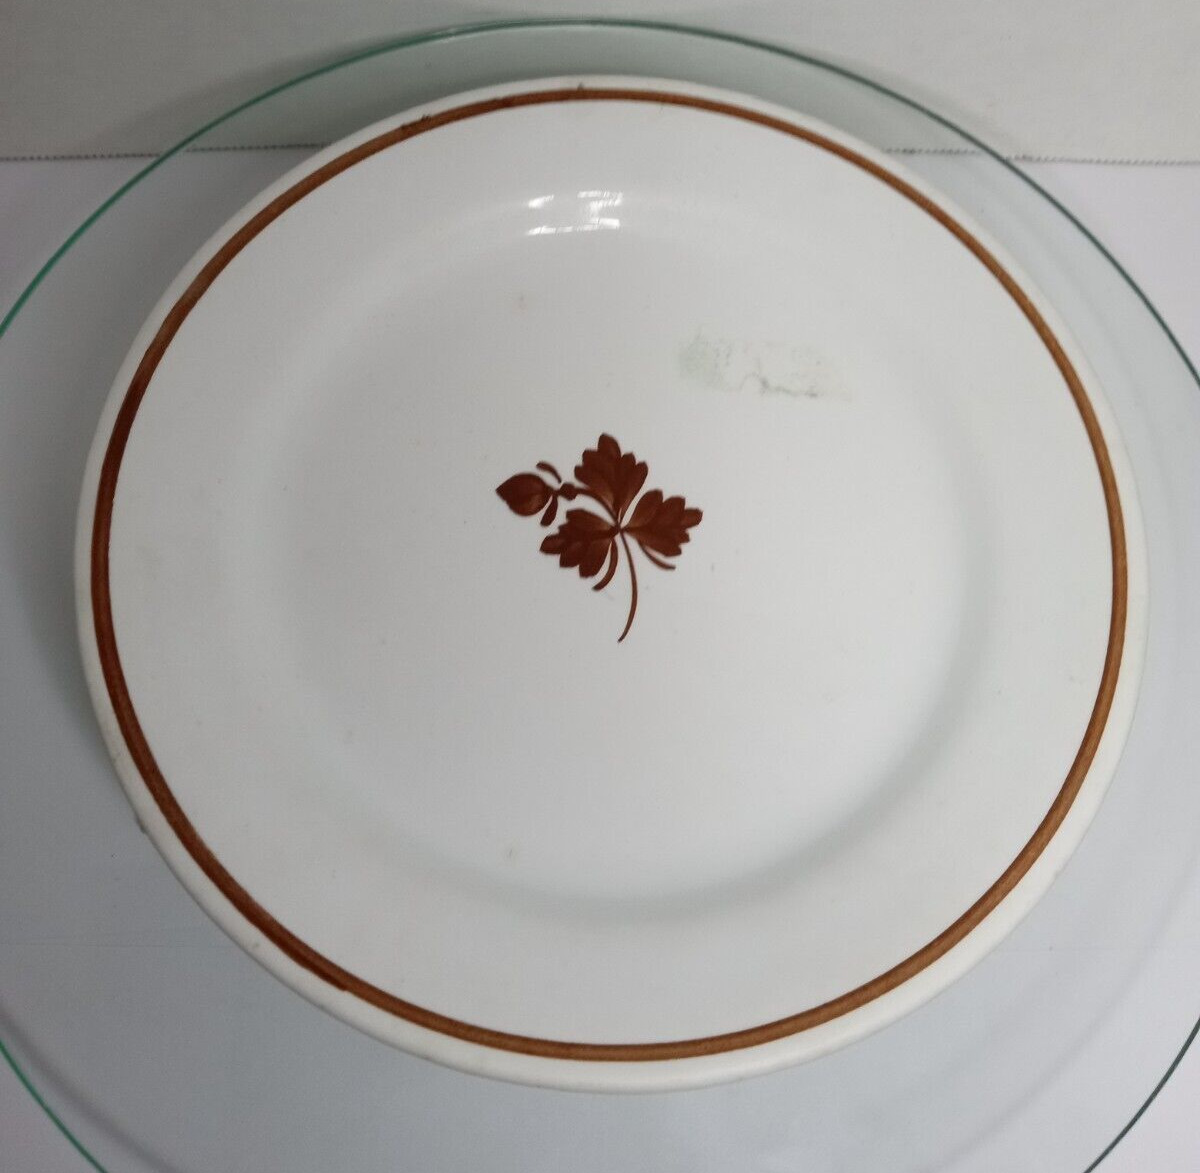 Vintage Royal Ironstone China Plate Alfred Meakin England 7.5